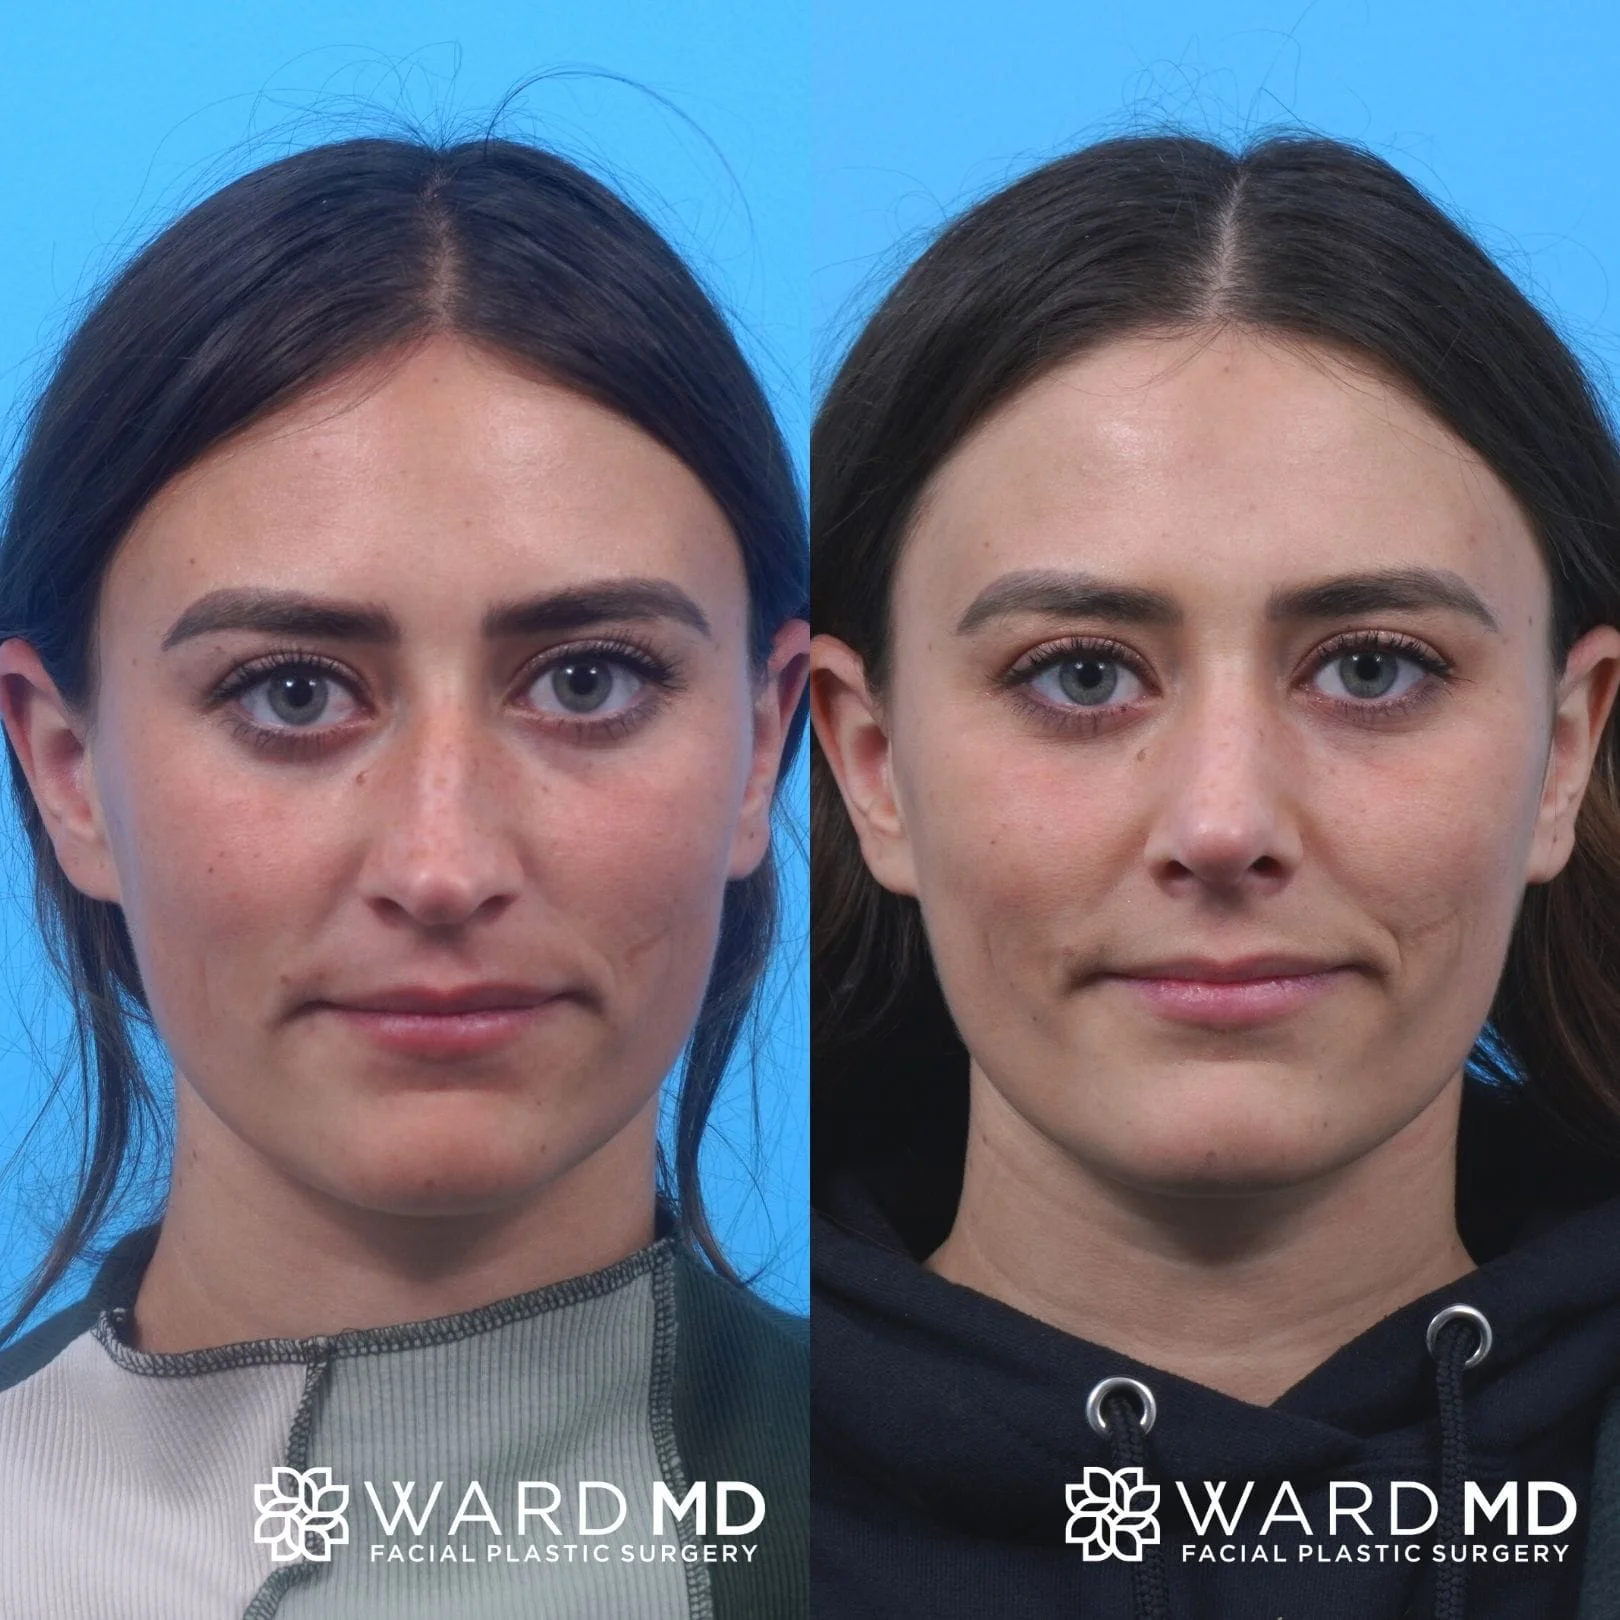 Female rhinoplasty before and after image.